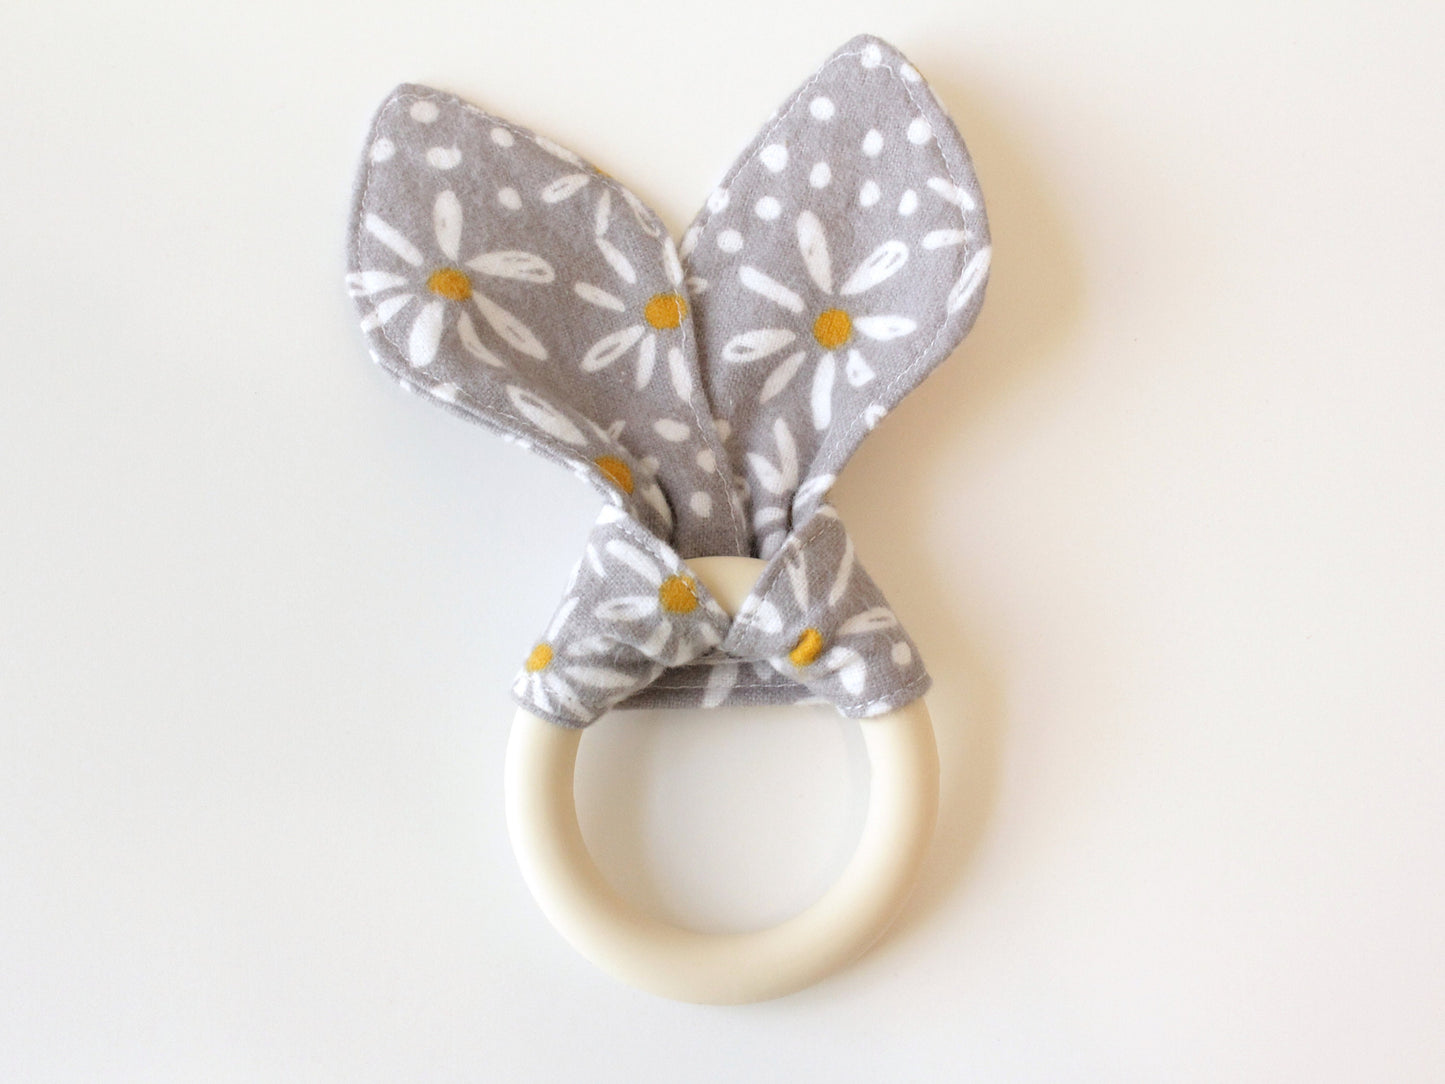 Daisy Silicone Bunny Ear Teether | Gender Neutral Baby Shower Gift Sensory Toy | CPSC Compliant